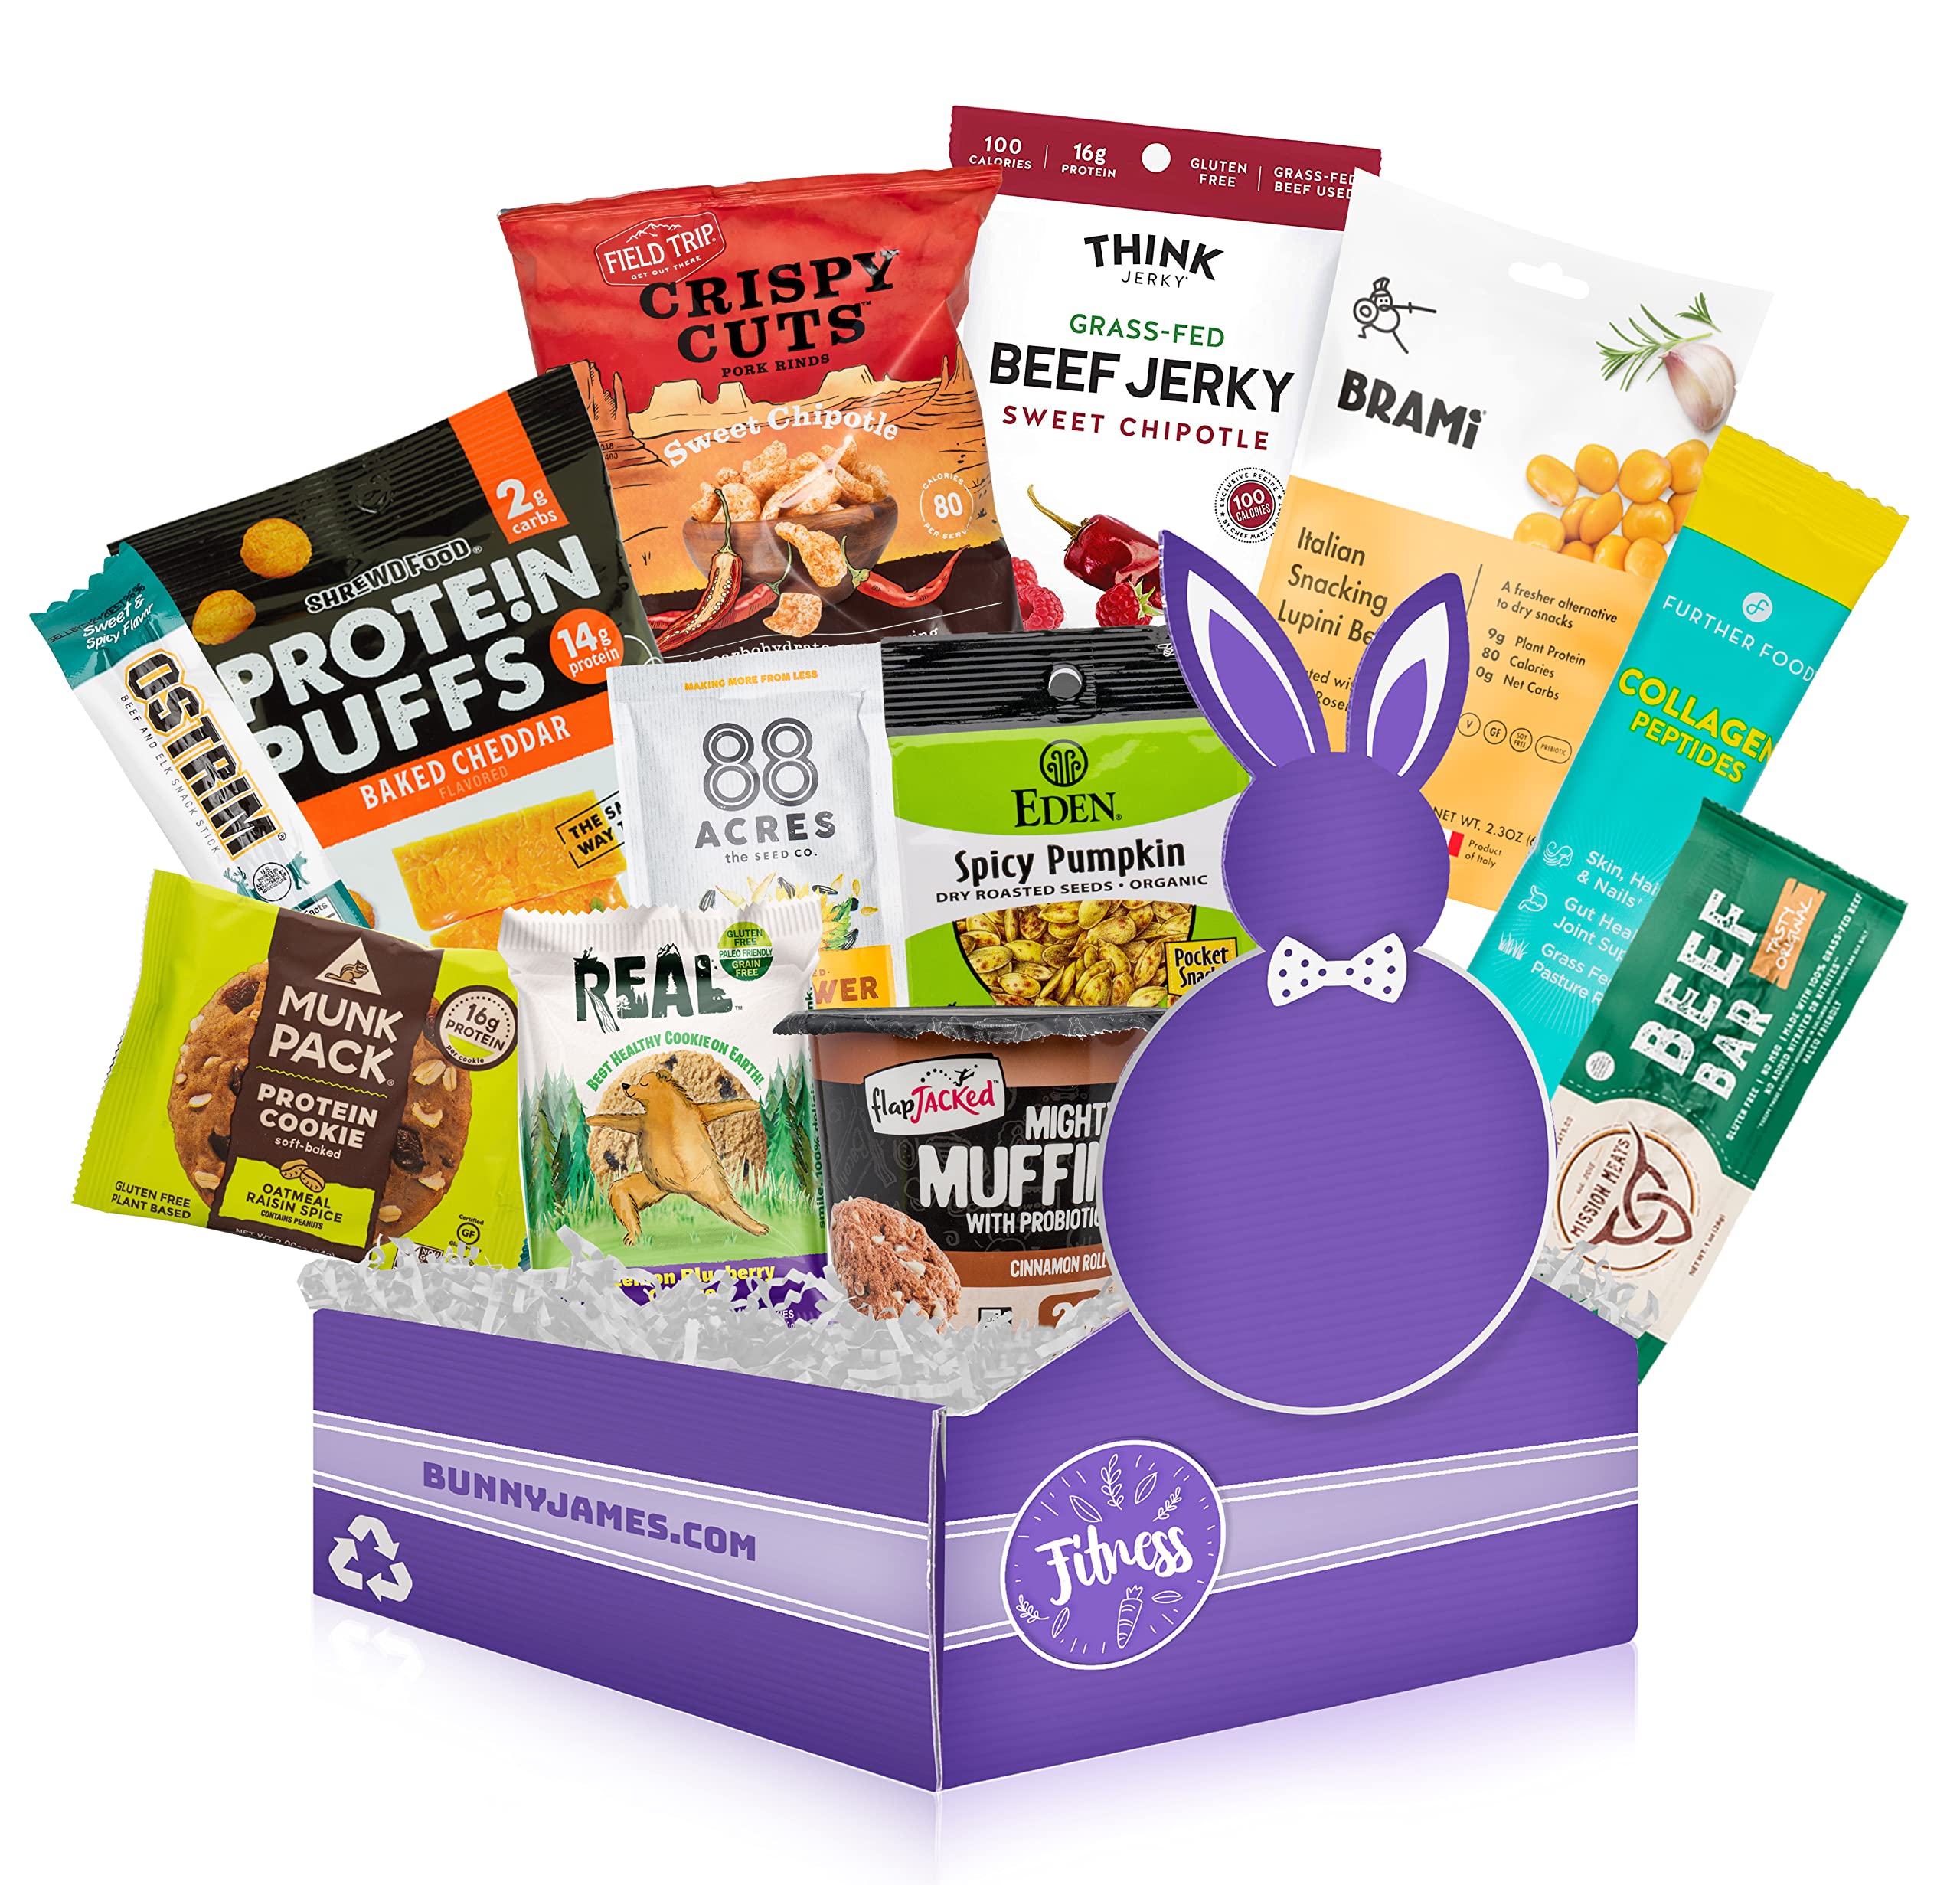 The BroBox Health Food Gift Basket I Awesome Box For Men I Premium Mix of  Healthy Gourmet Protein Snacks I Perfect Fitness Care Package Gifts I Pure